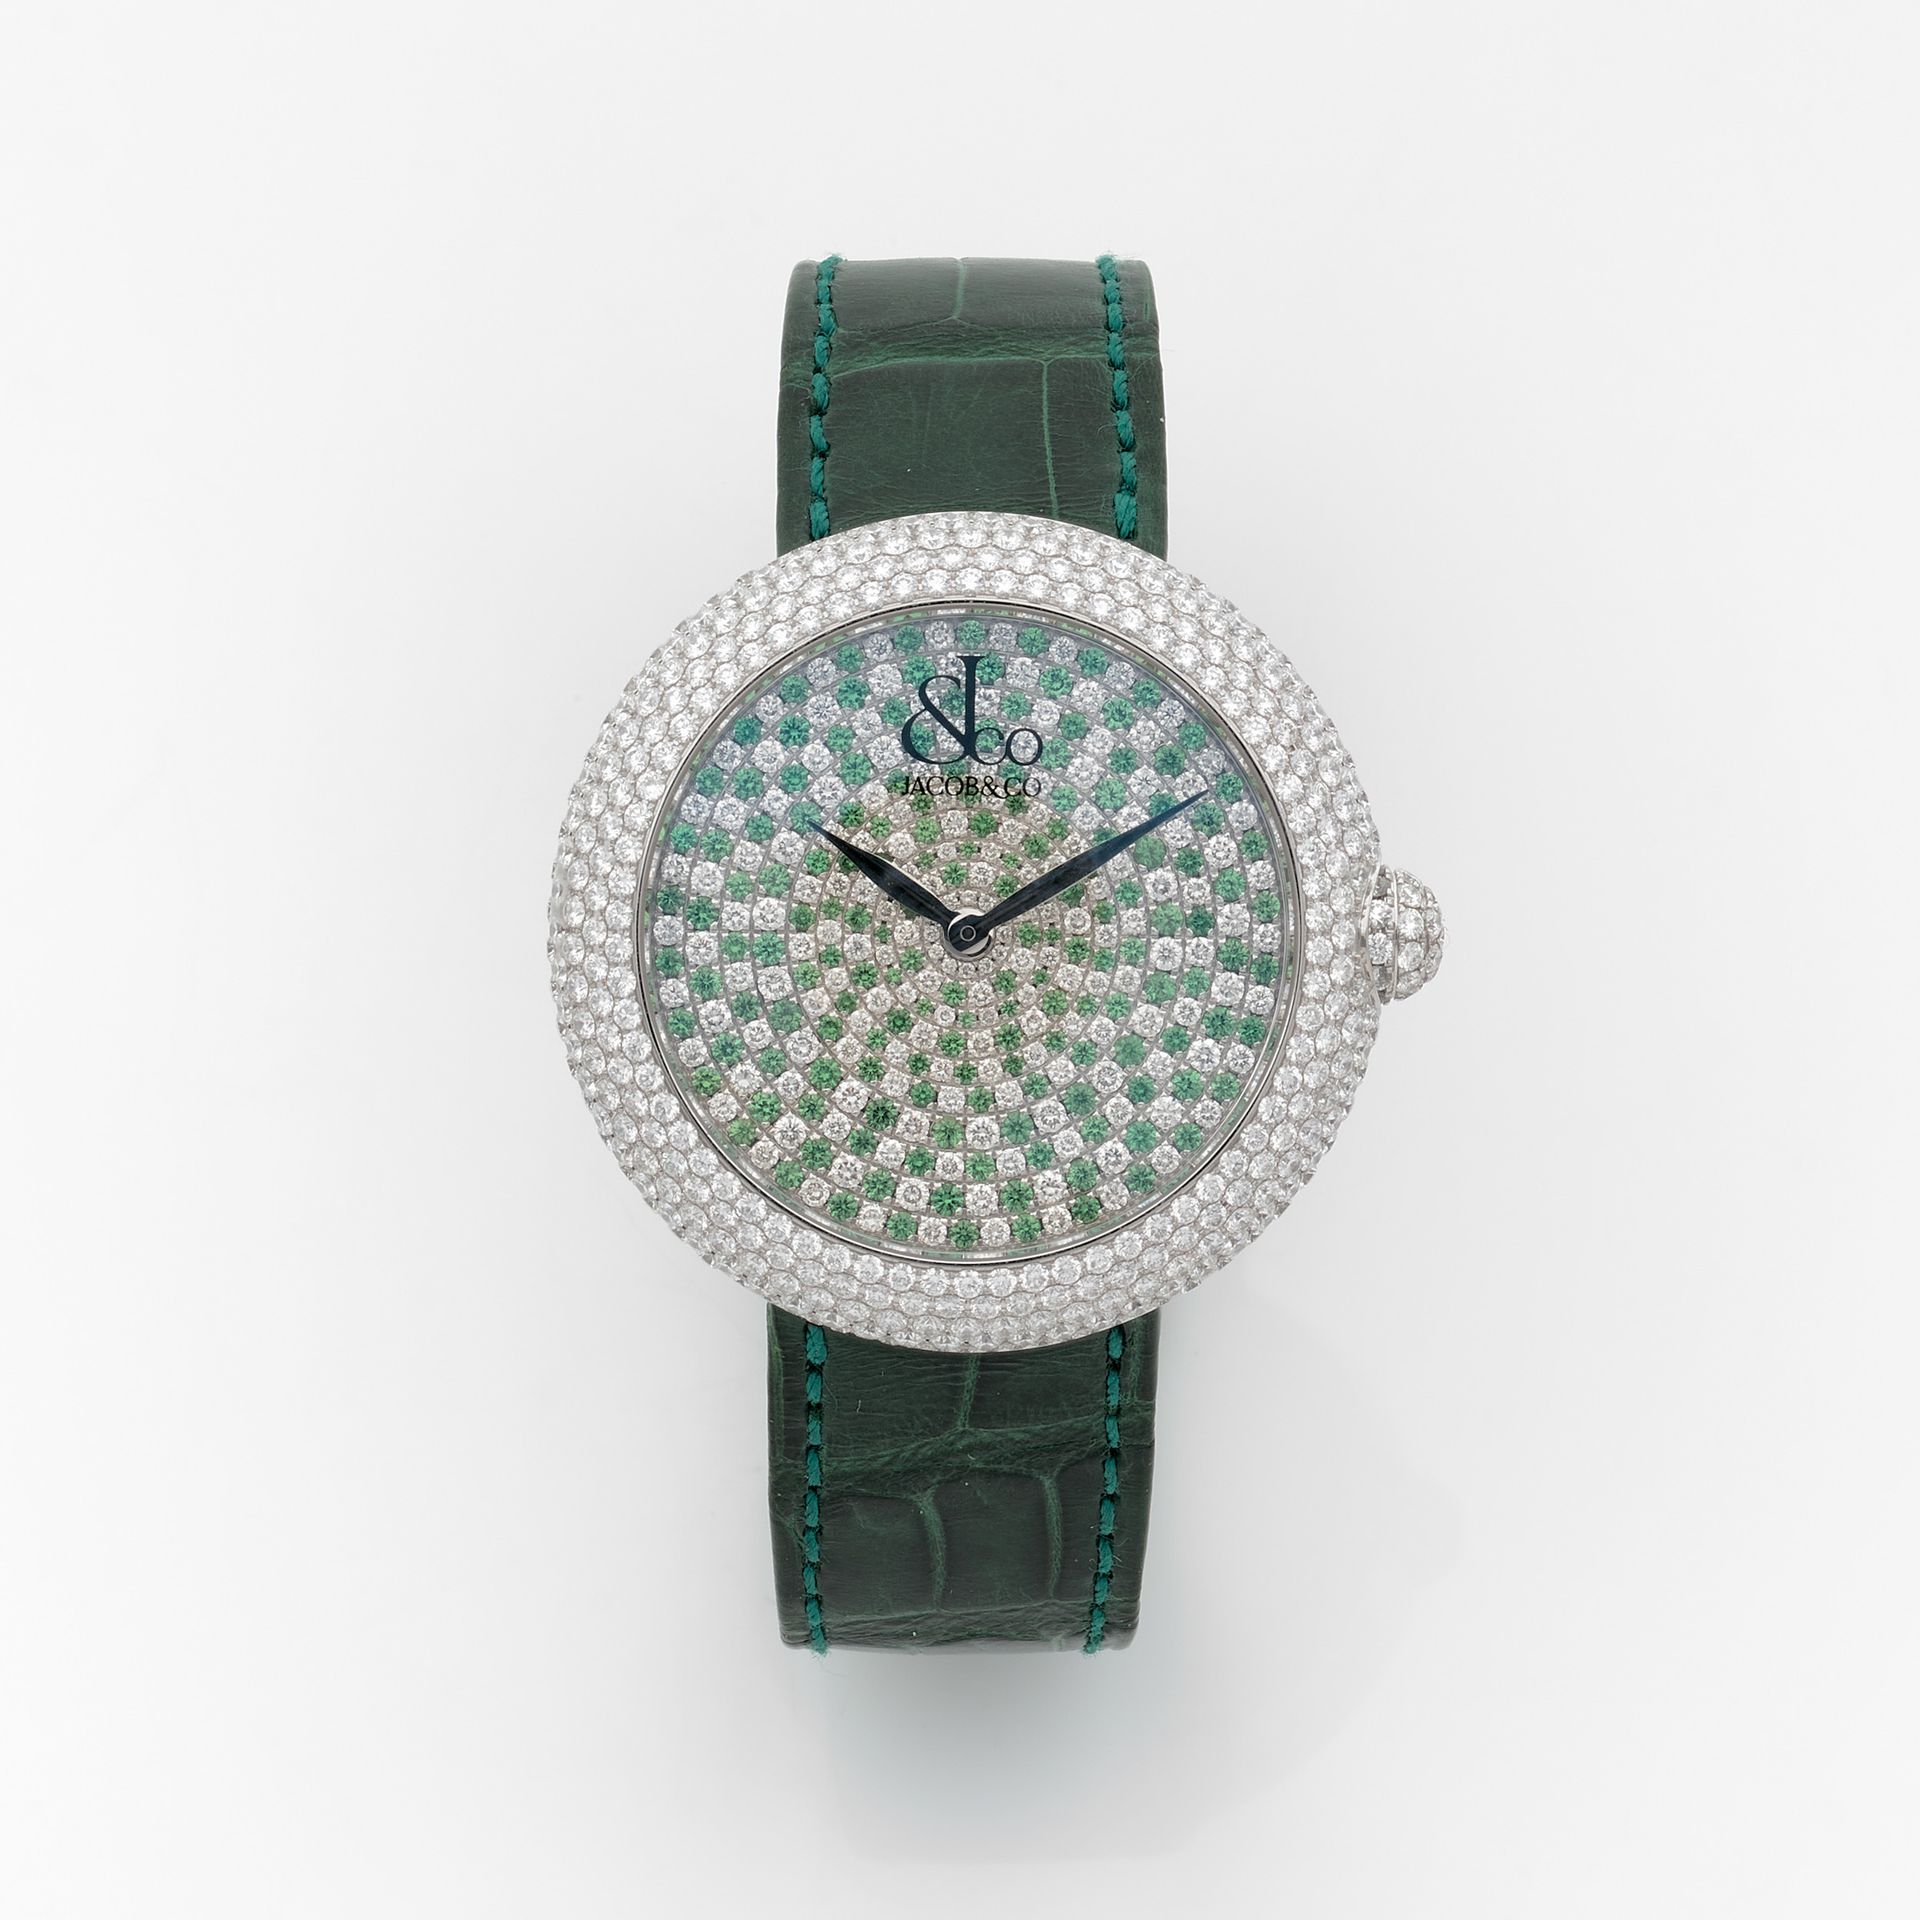 Null Ref. 210.01

Mixed model in steel jewelry

Dial paved with diamonds and gre&hellip;